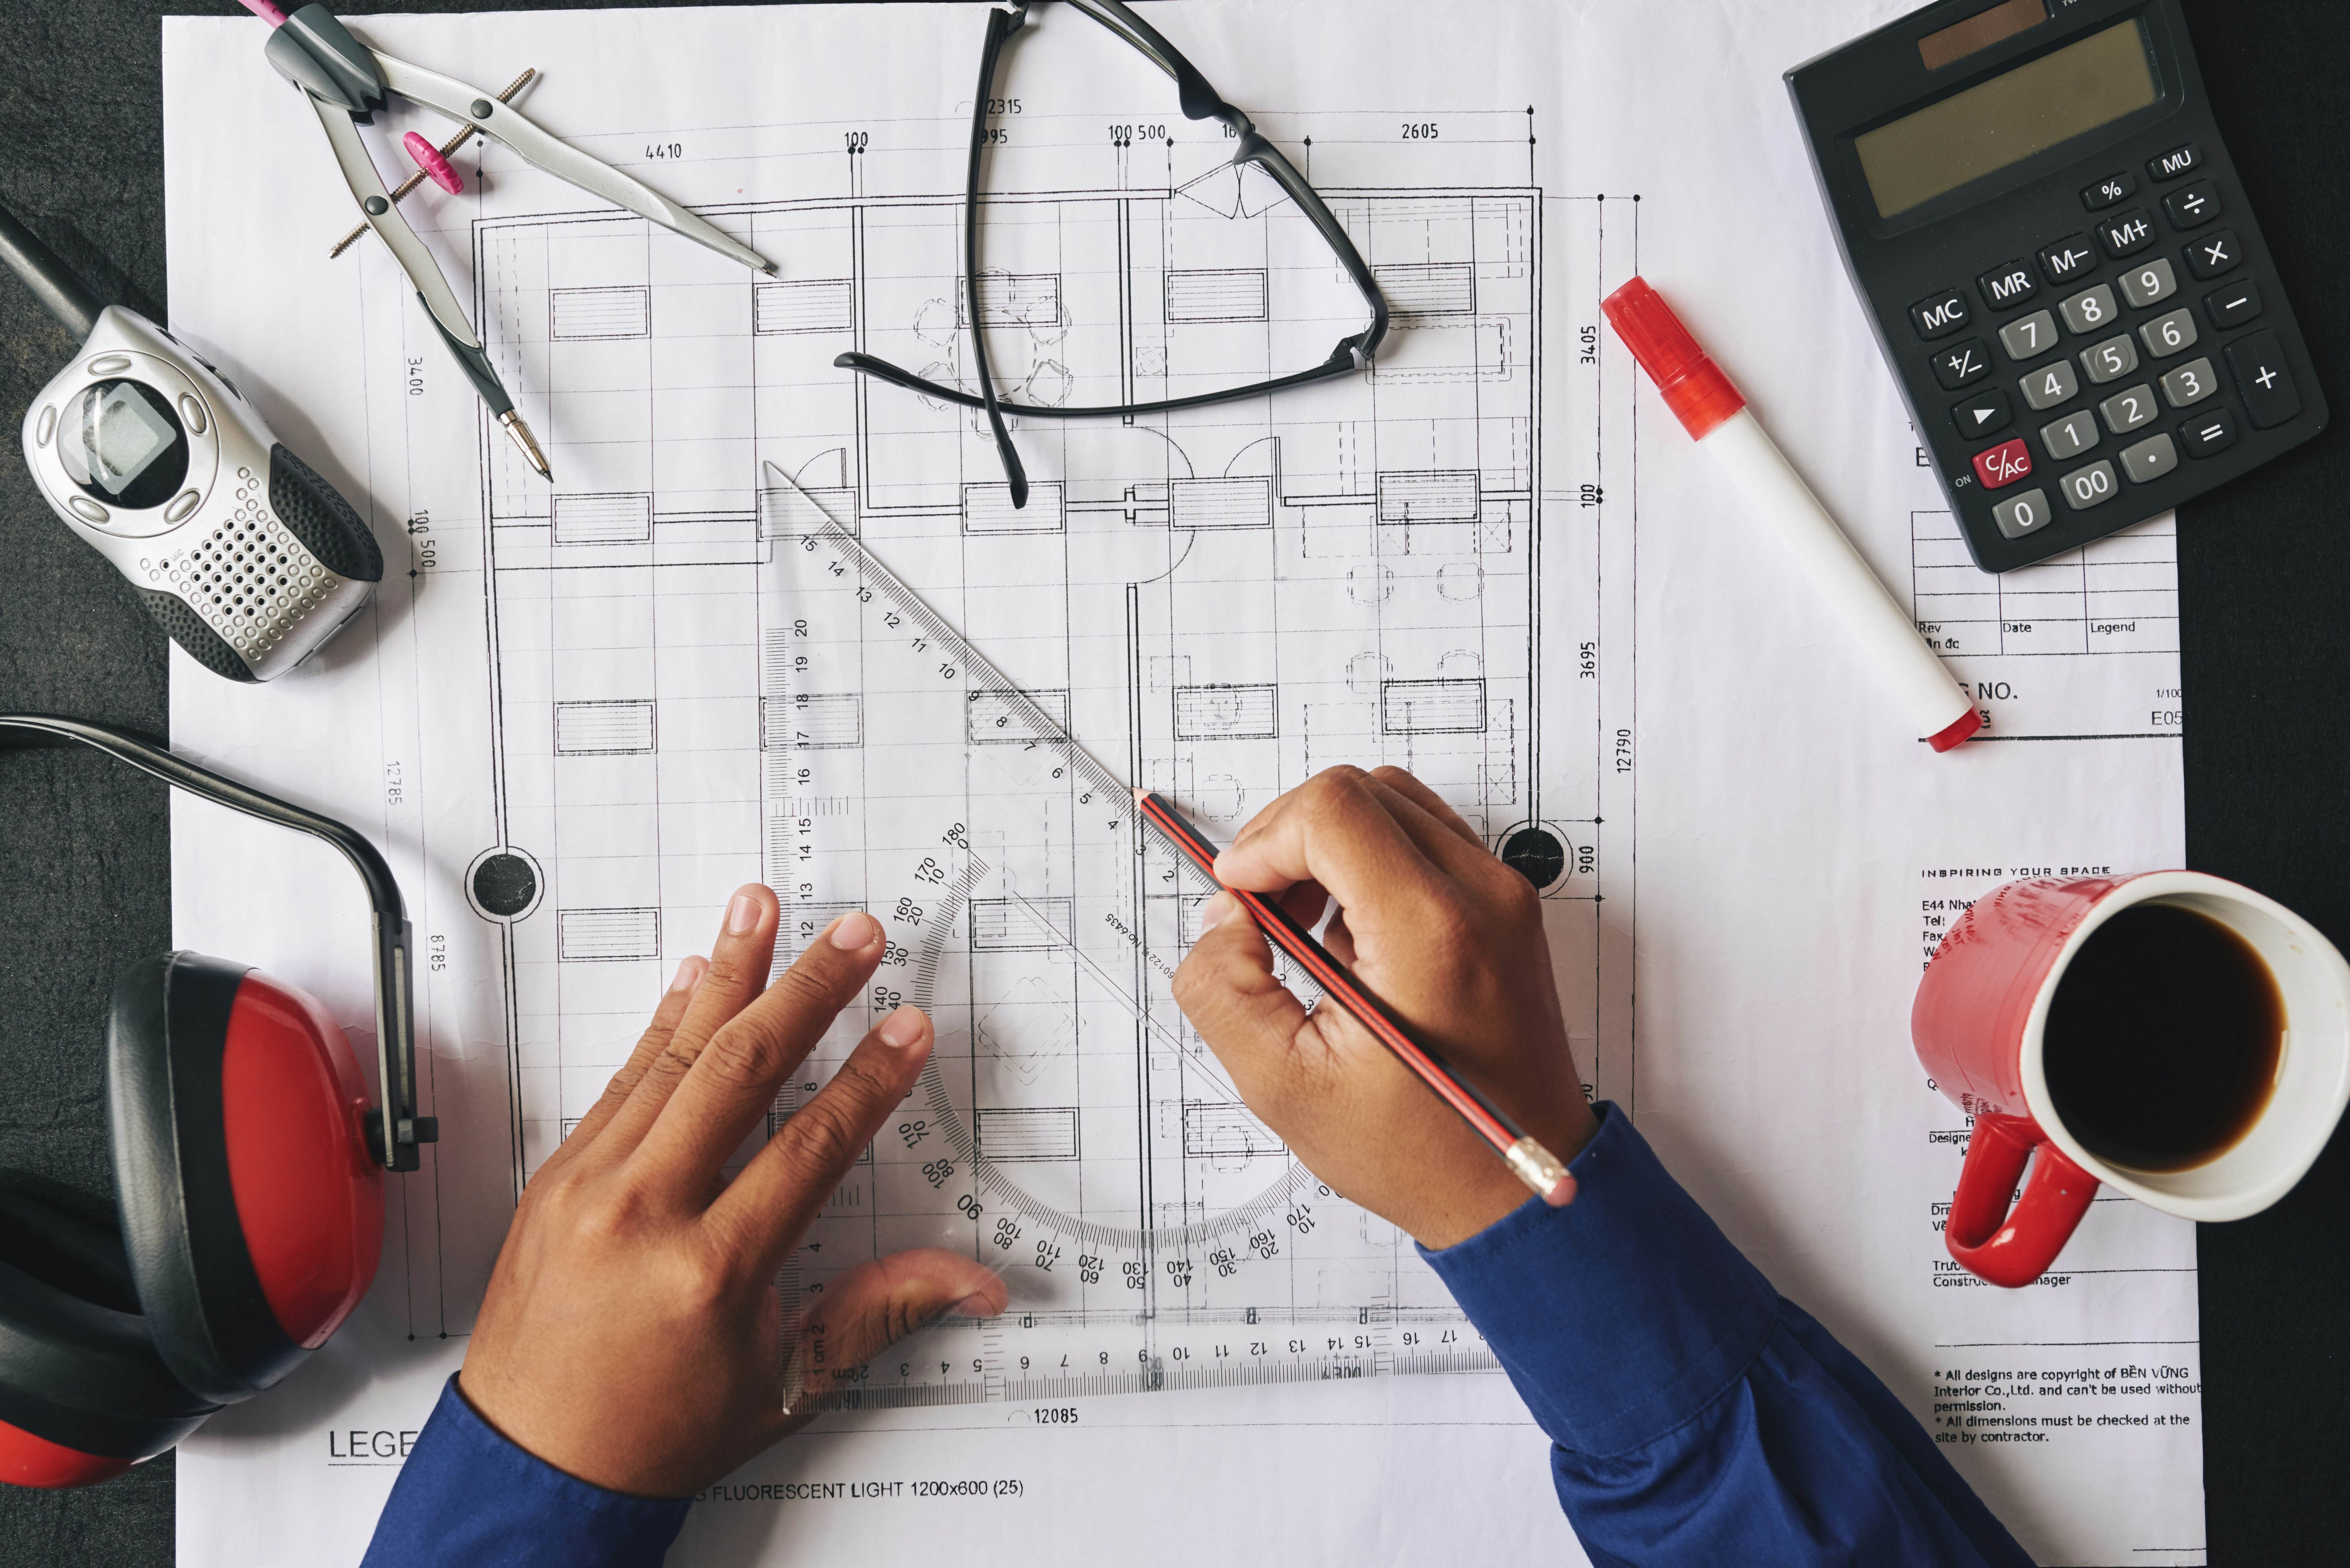 Civil Engineering vs Architecture. Which Degree to Study in 2021? -  MastersPortal.com